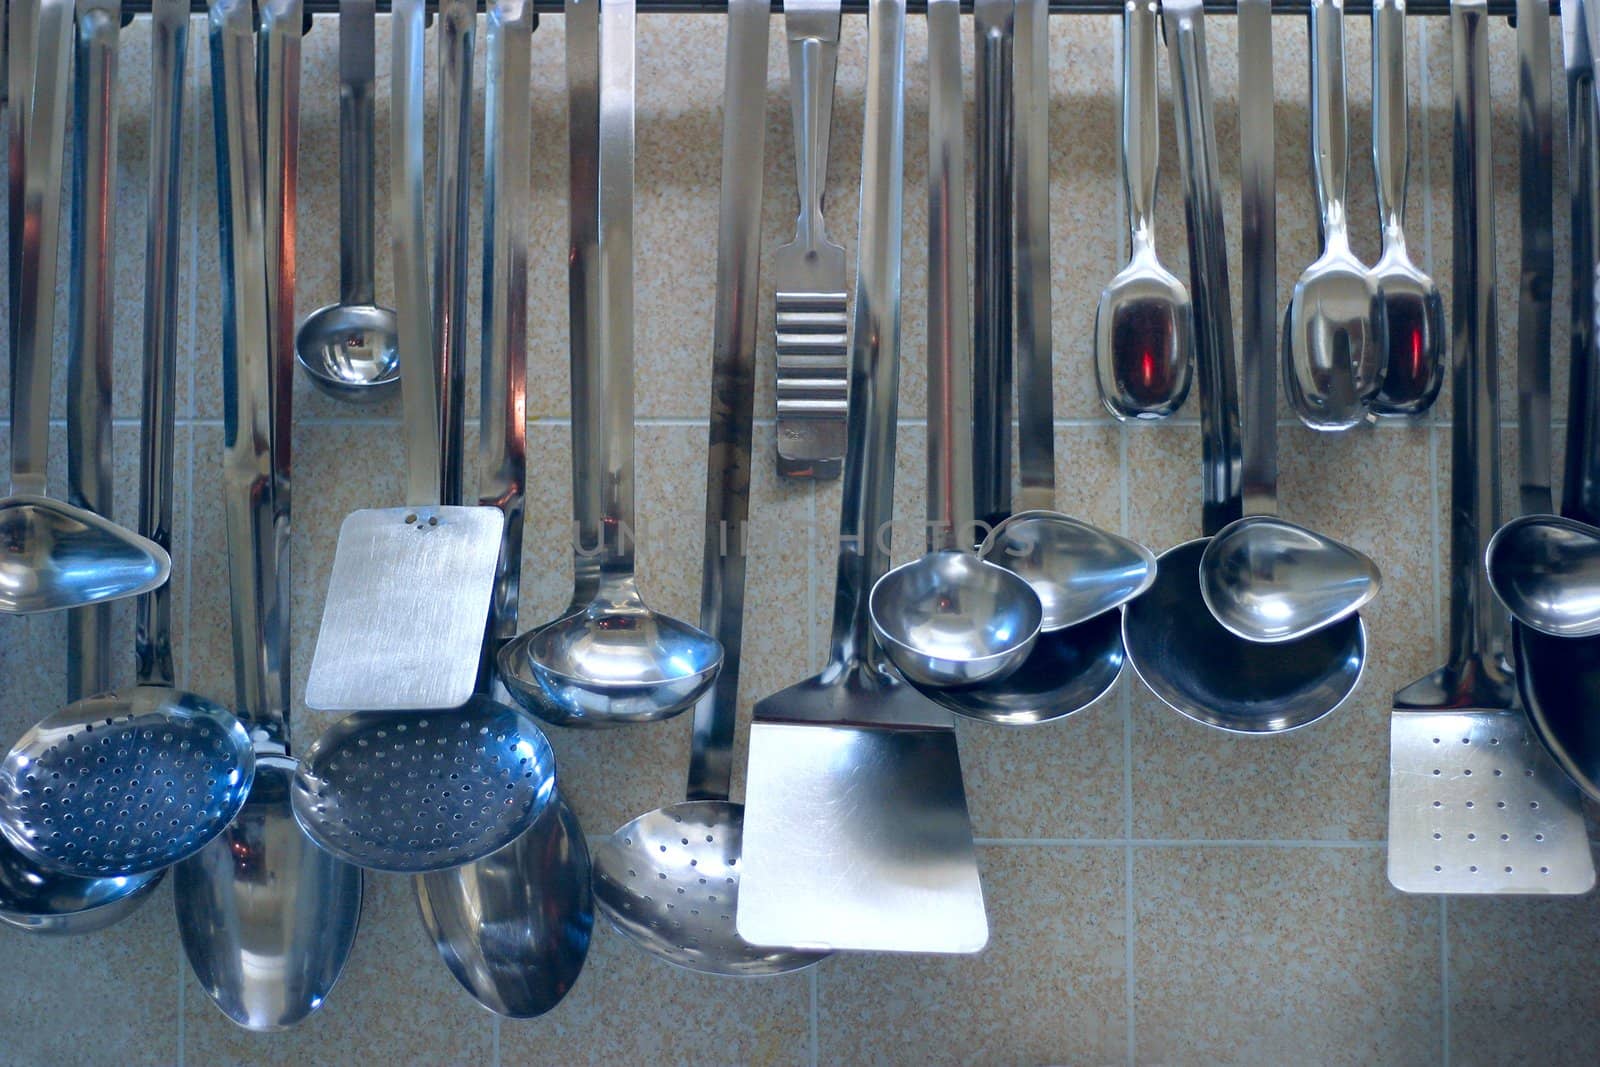 Many different tools for preparation of food at restaurant